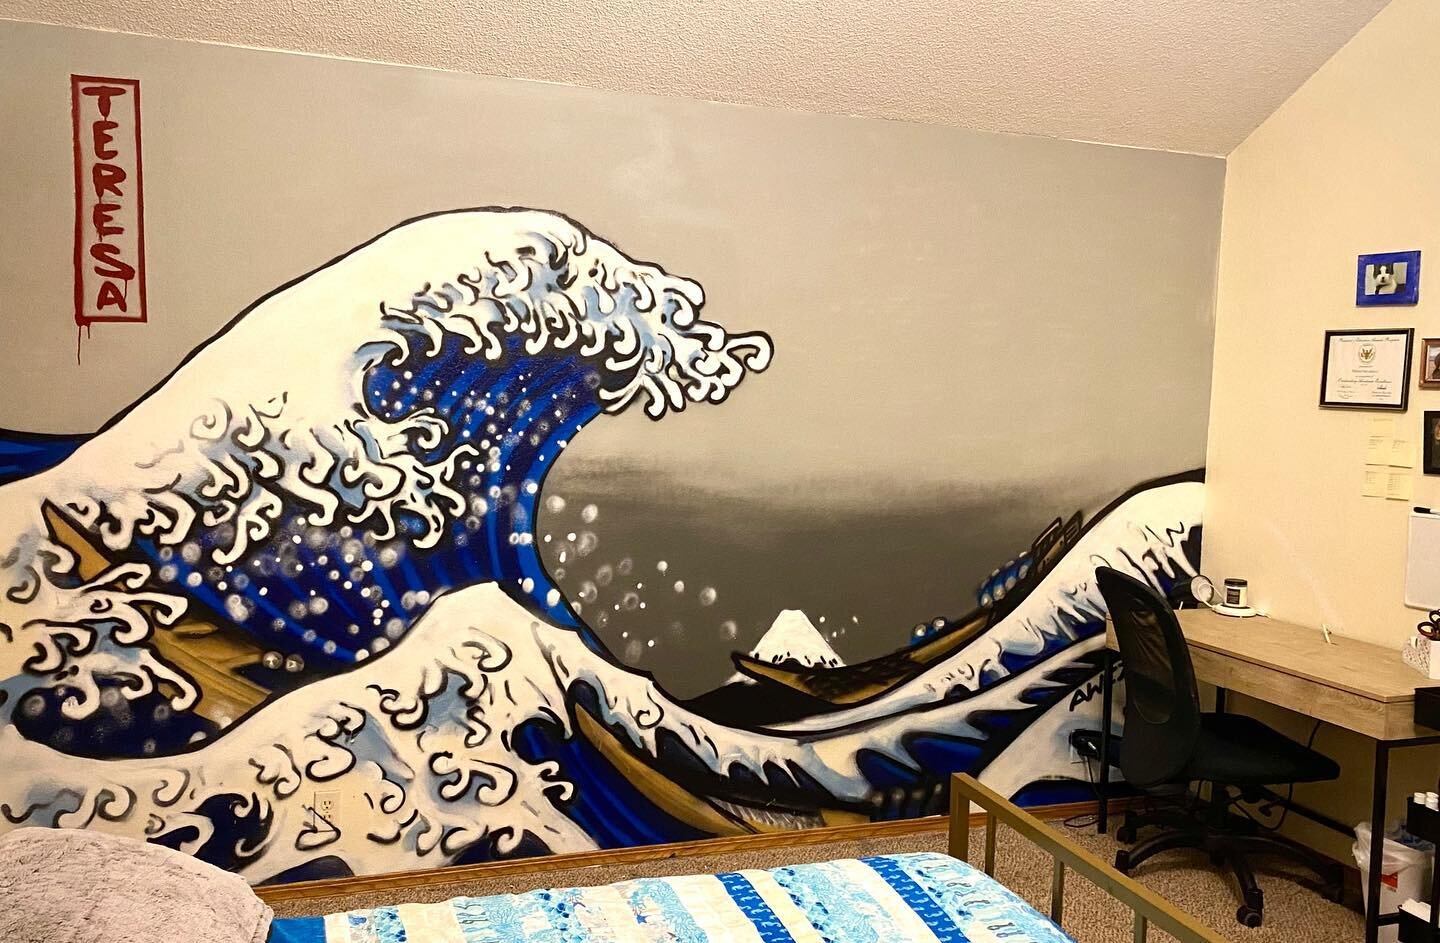 Every storm runs out of rain &hellip; 

freehand spray paint study of Hokusai - The Great Wave 🌊 

#awez #wf